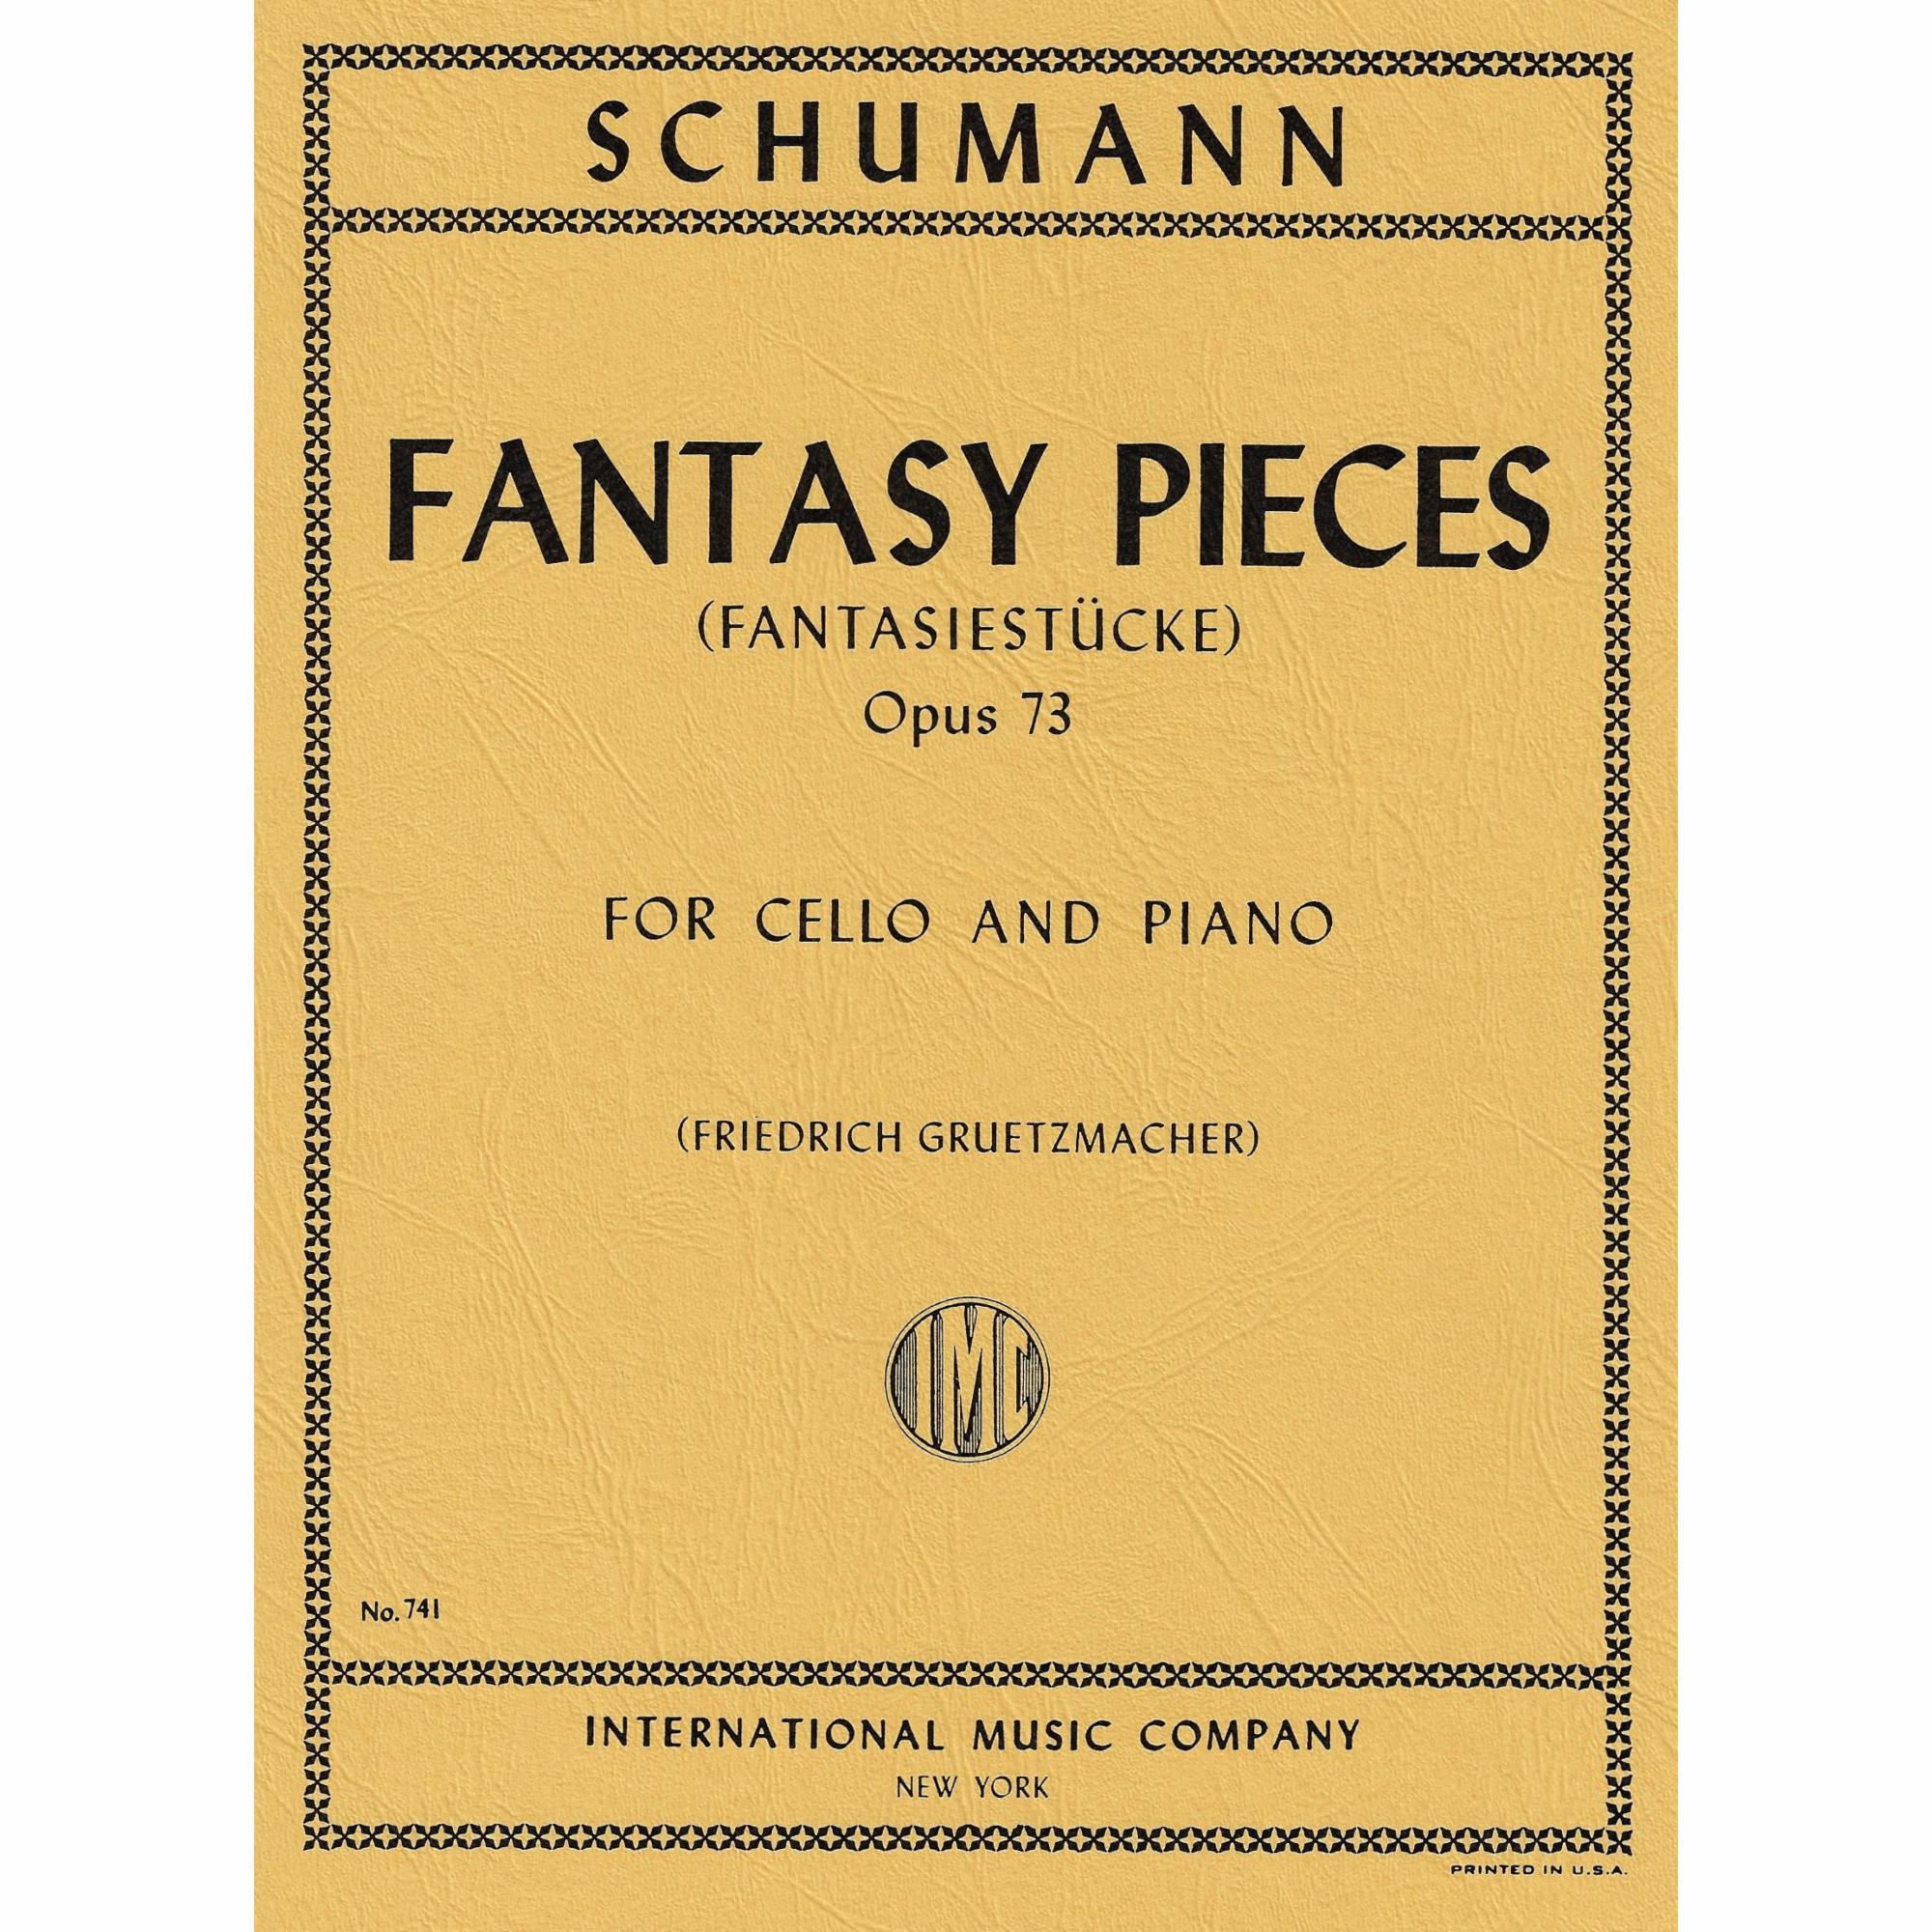 Fantasy Pieces, Op. 73 for Cello and Piano